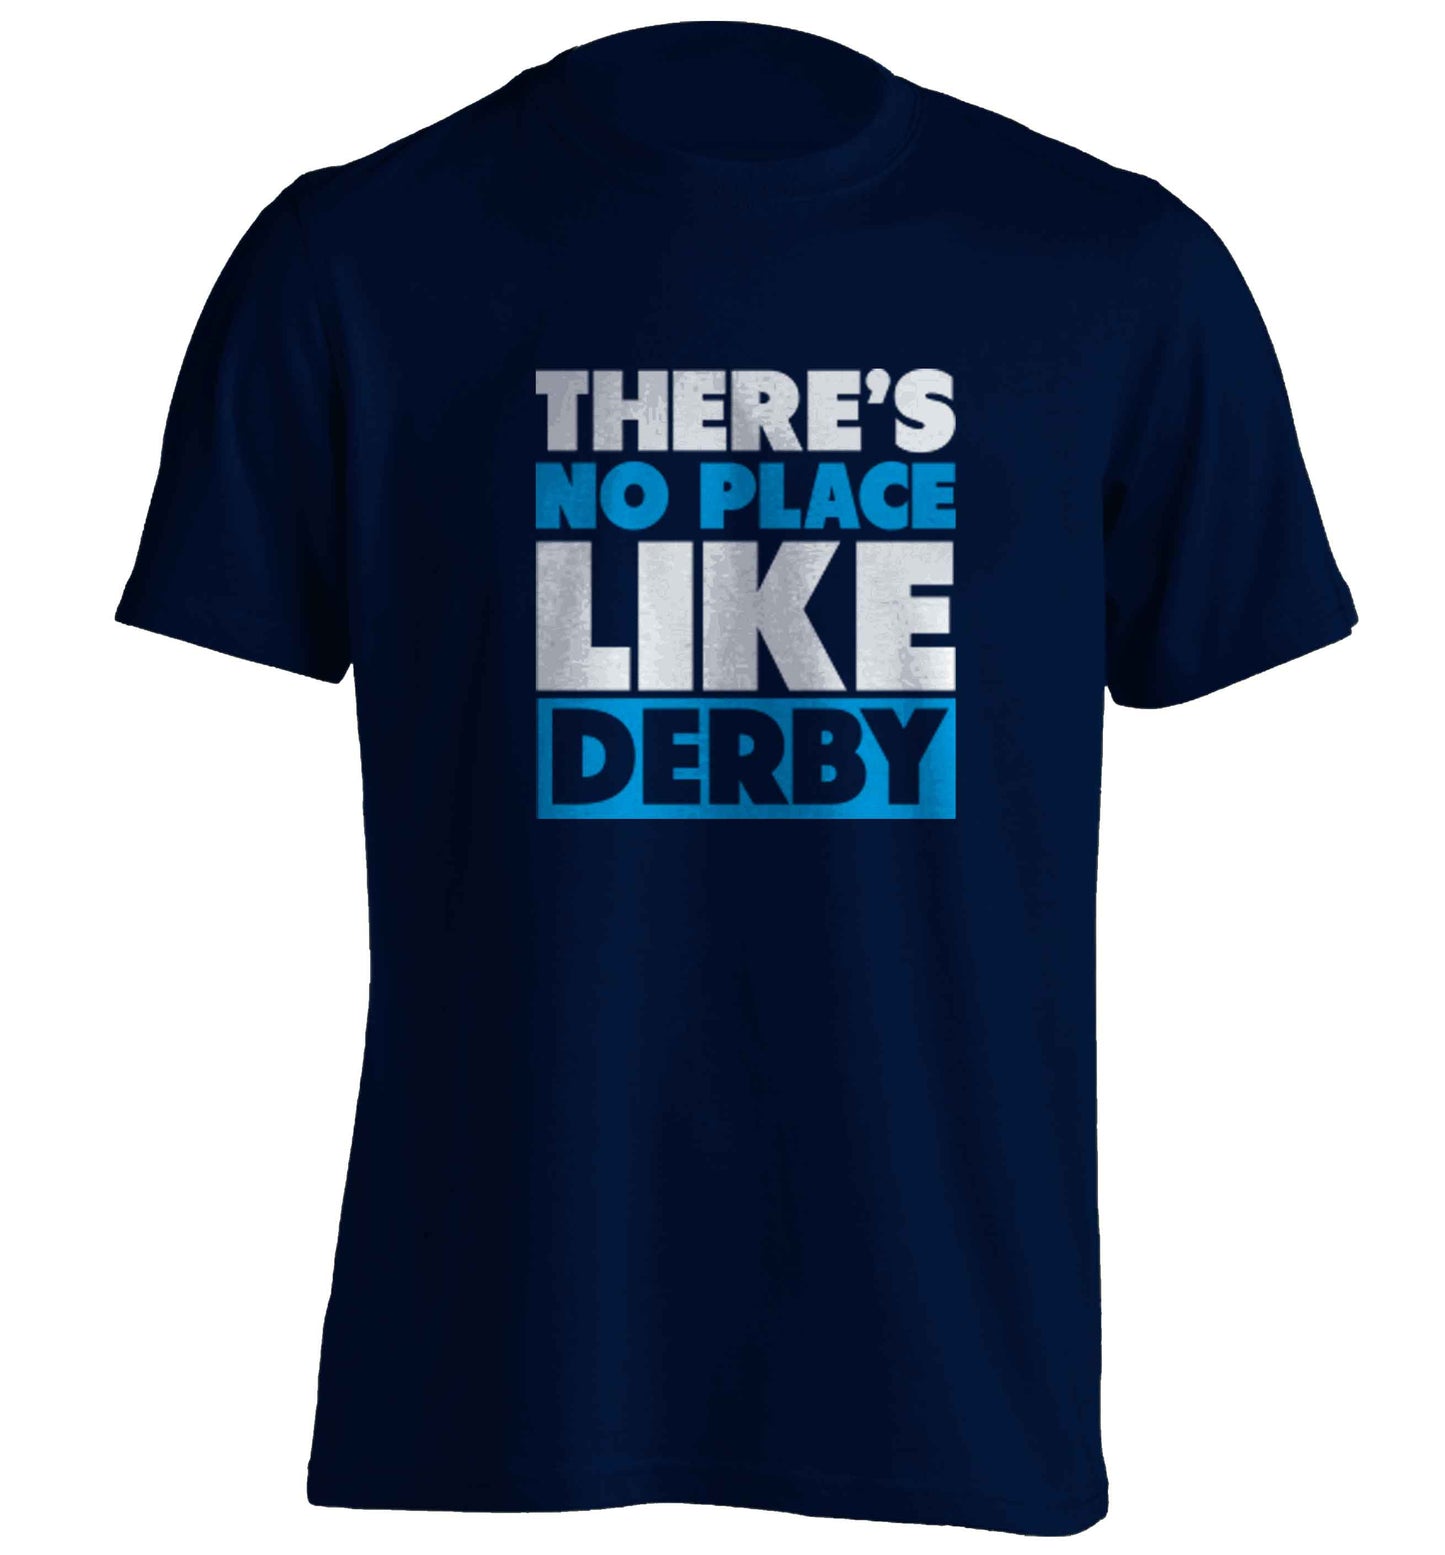 There's no place like Derby adults unisex navy Tshirt 2XL